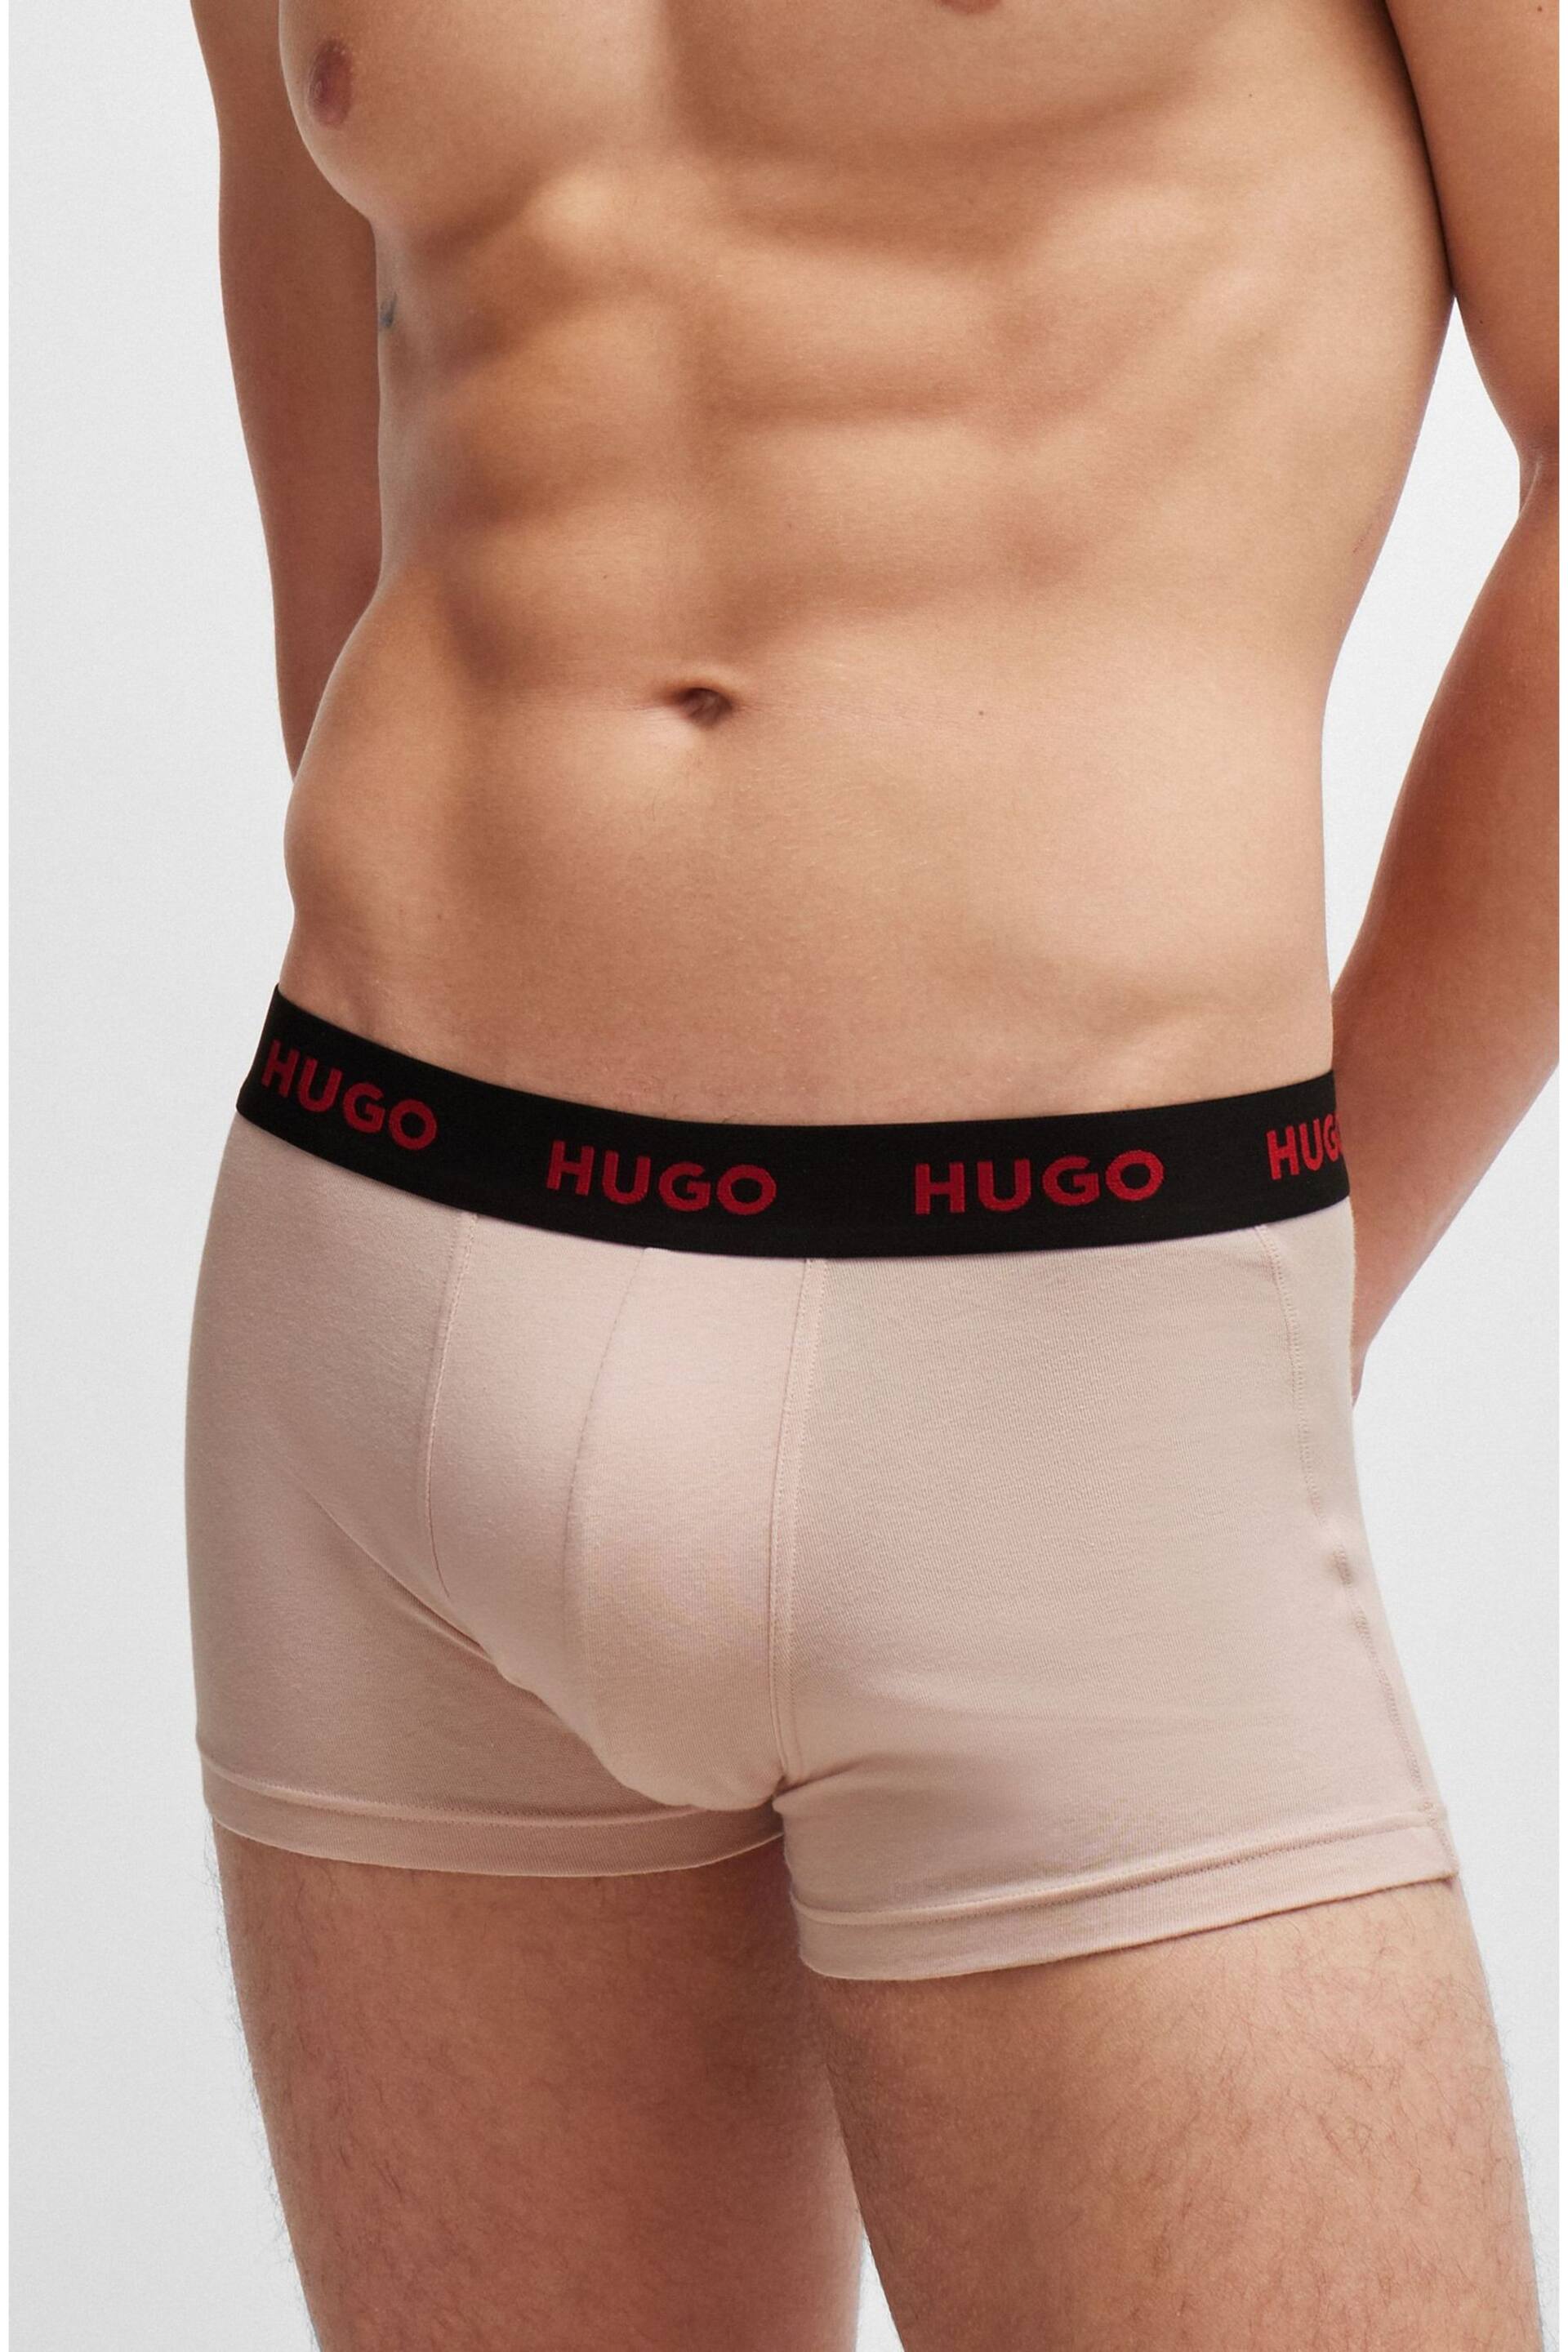 HUGO Pink Logo Waistband Stretch Cotton Boxers 3-Pack - Image 7 of 7